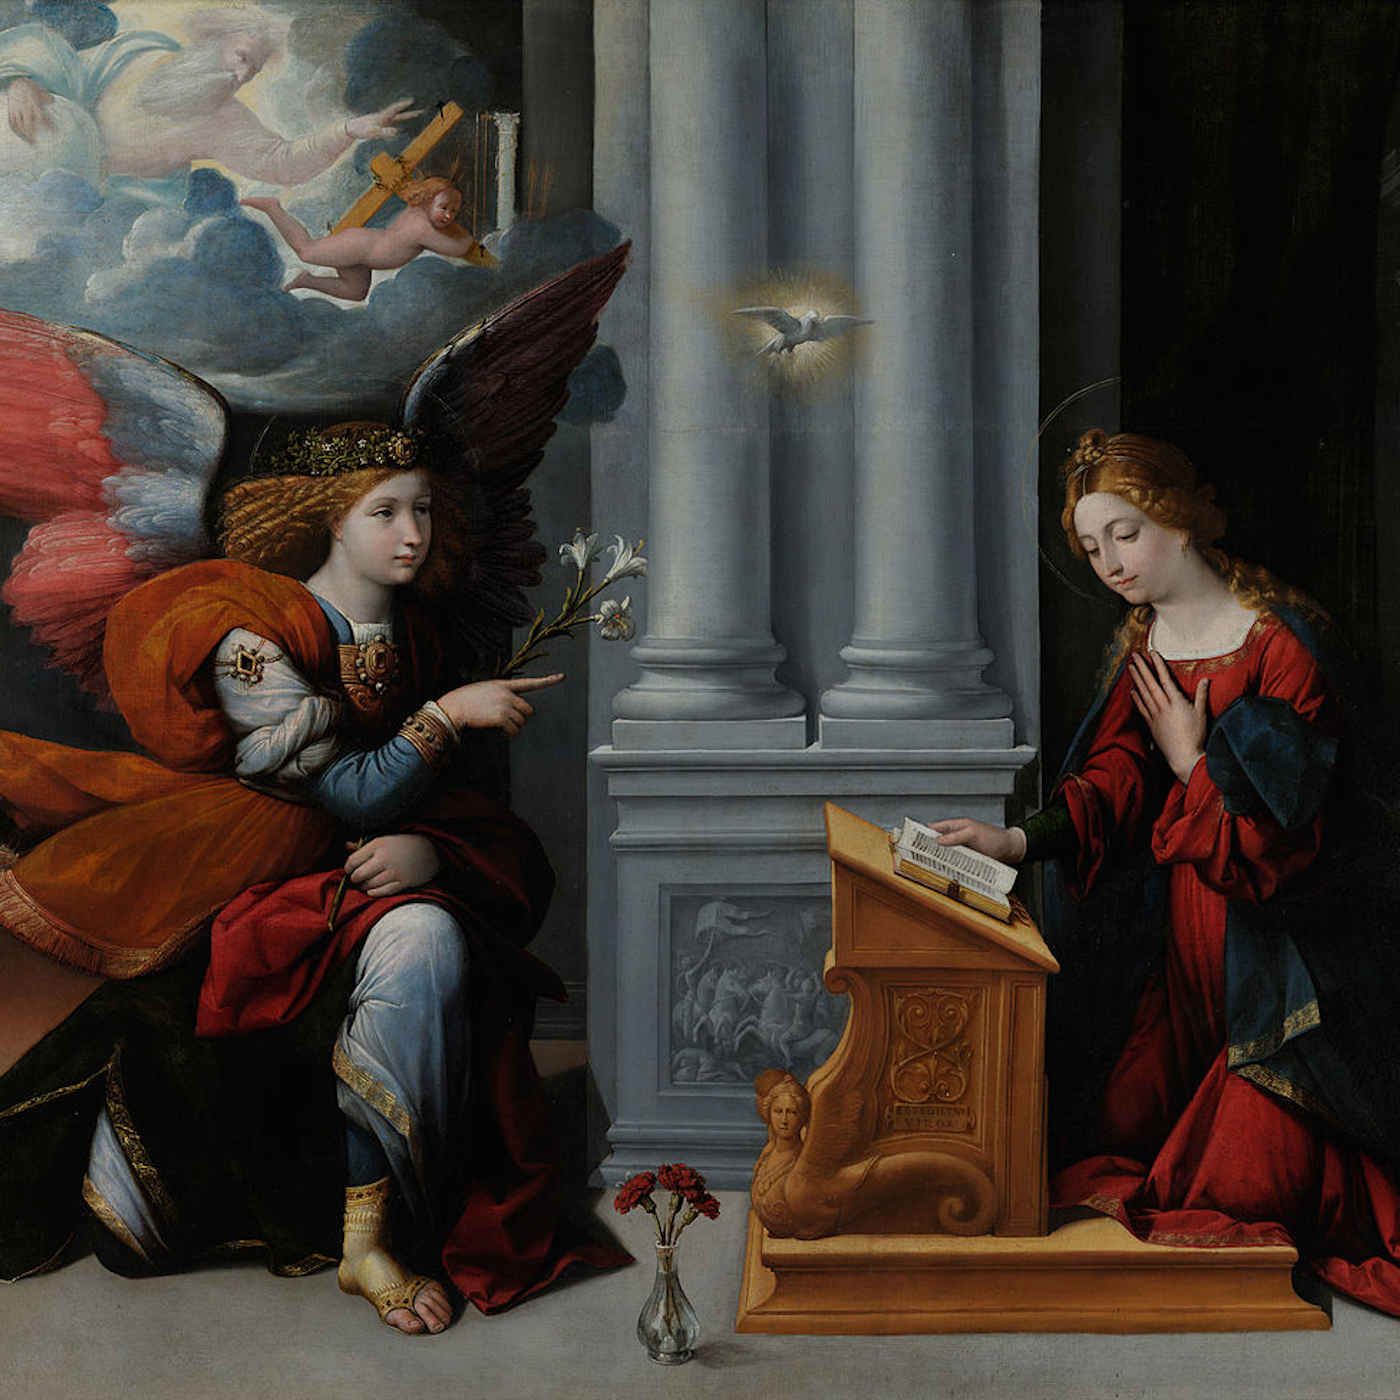 Solemnity of the Annunciation - Let it Be